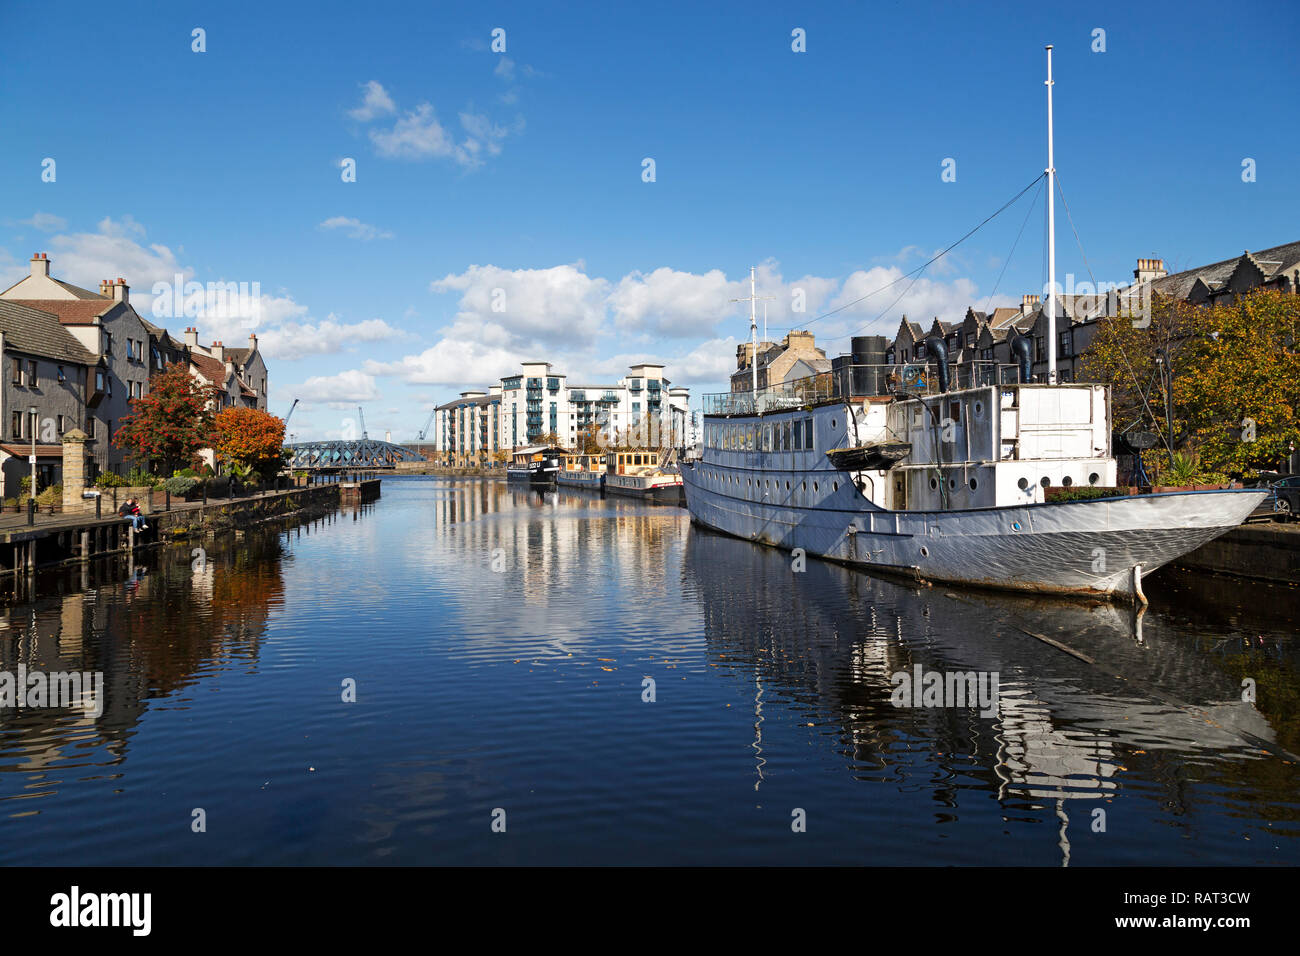 The Ristorante de Niro at Leith in Edinburgh, Scotland. The Water of Leith flows into the Firth of Forth at Leith. Stock Photo